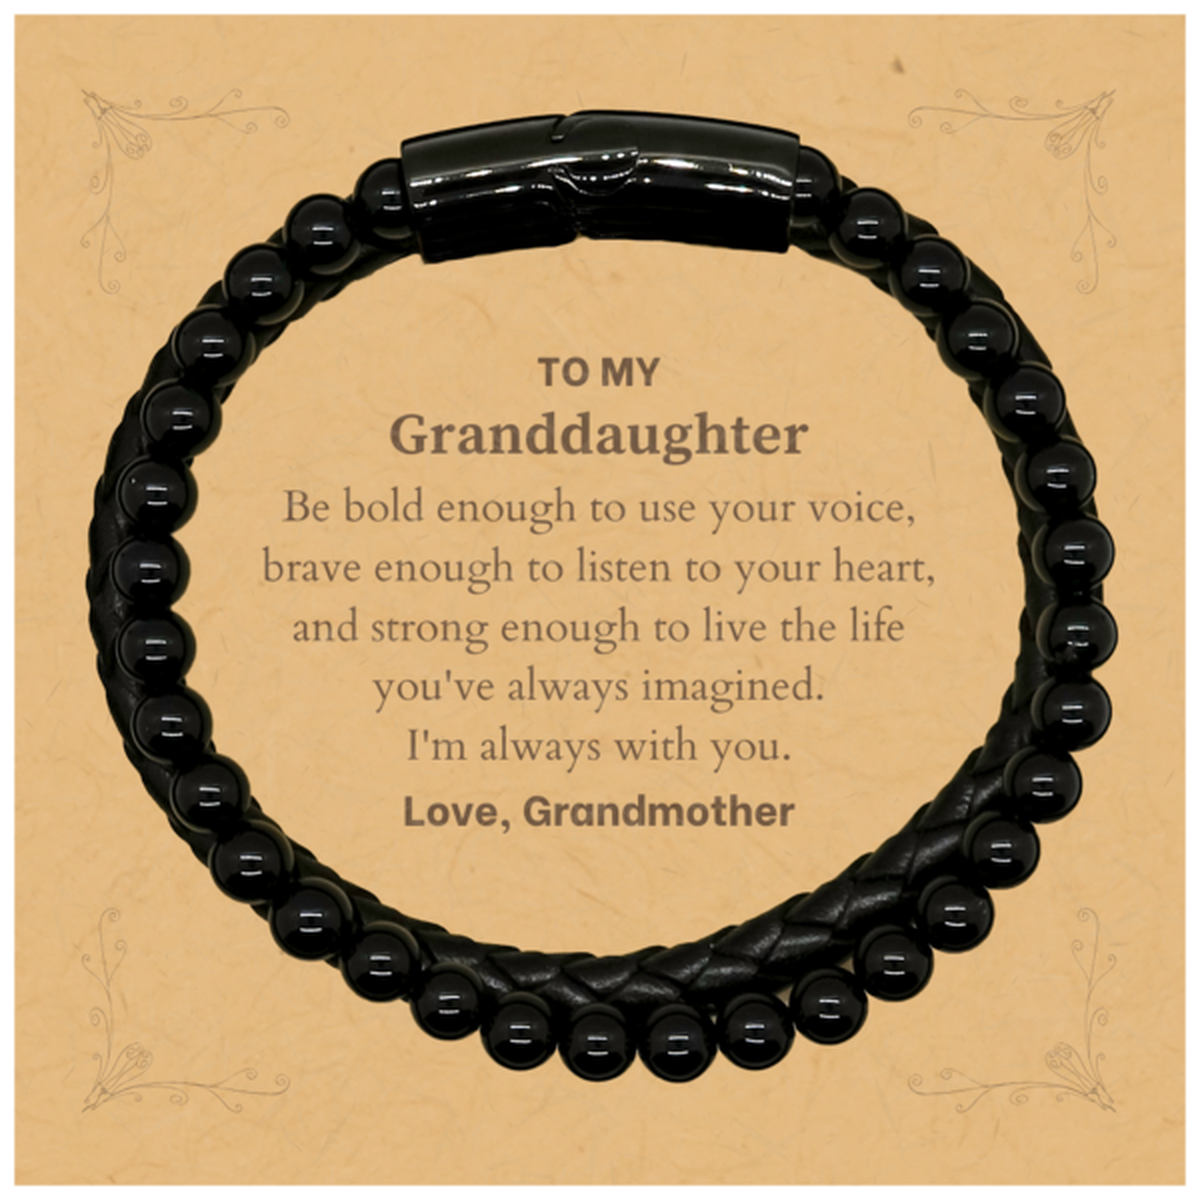 Keepsake Granddaughter Stone Leather Bracelets Gift Idea Graduation Christmas Birthday Granddaughter from Grandmother, Granddaughter Be bold enough to use your voice, brave enough to listen to your heart. Love, Grandmother